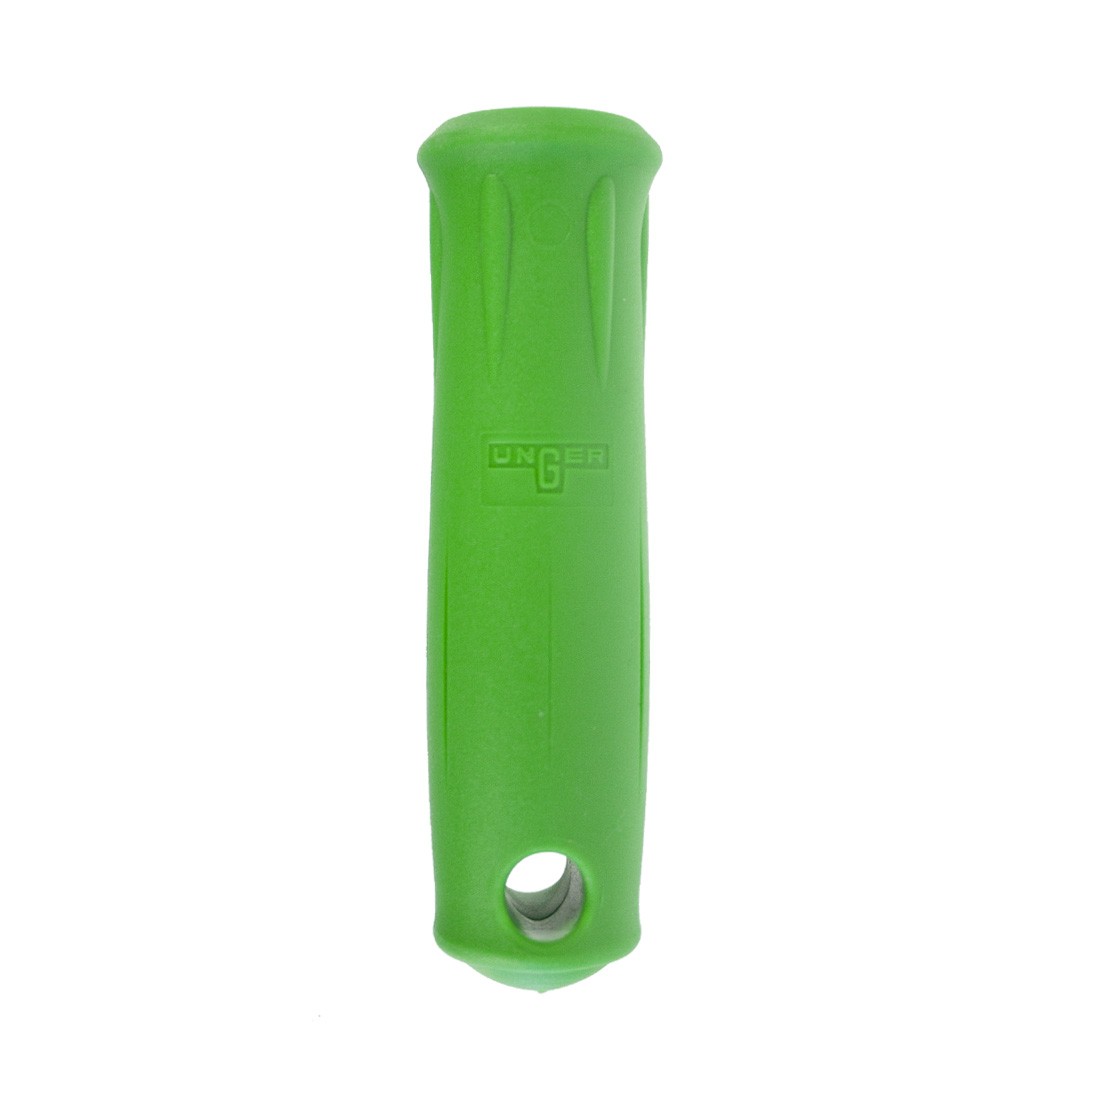 Unger Replacement OptiLoc Grip - Upright Front View